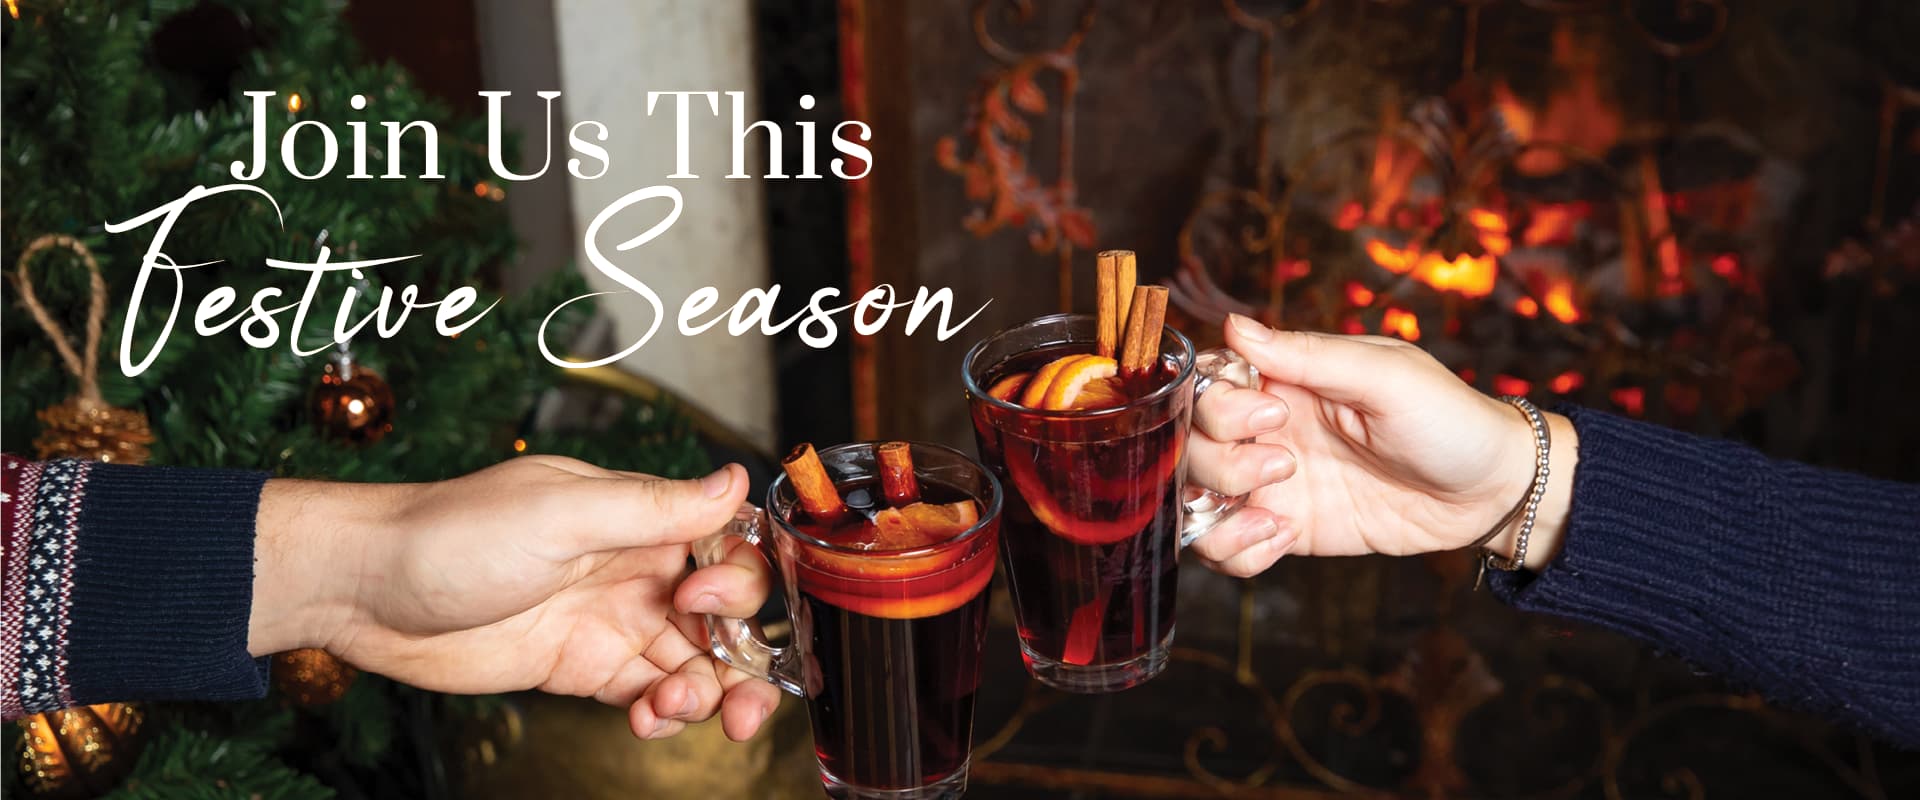 join us this festive season at The Oak Tree | Mulled Wine